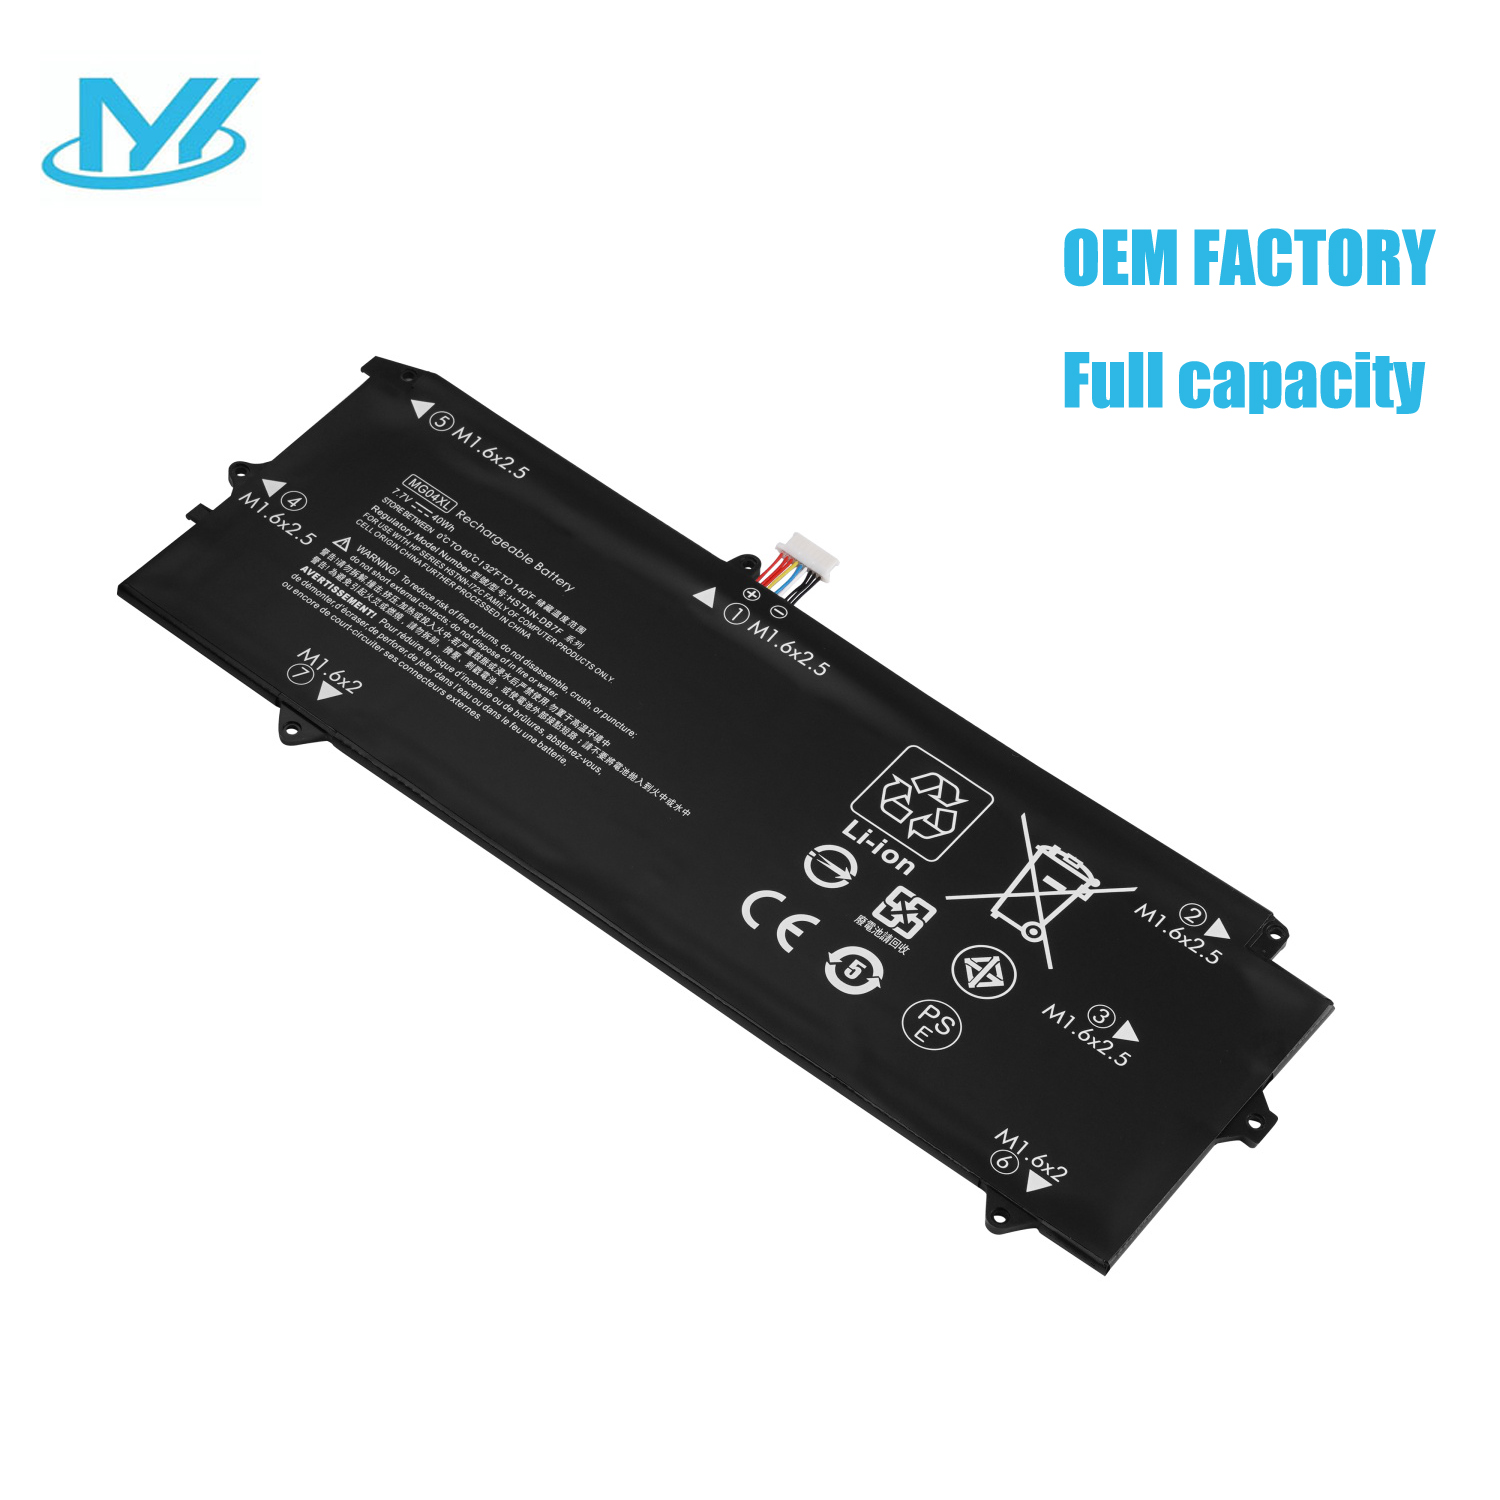 MG04XL rechargeable lithium ion Notebook battery Laptop battery for HP Elite X2 1012 G1 Series Notebook MC04XL MG04 HSTNN-DB7F 812060-2C1 812060-2B1